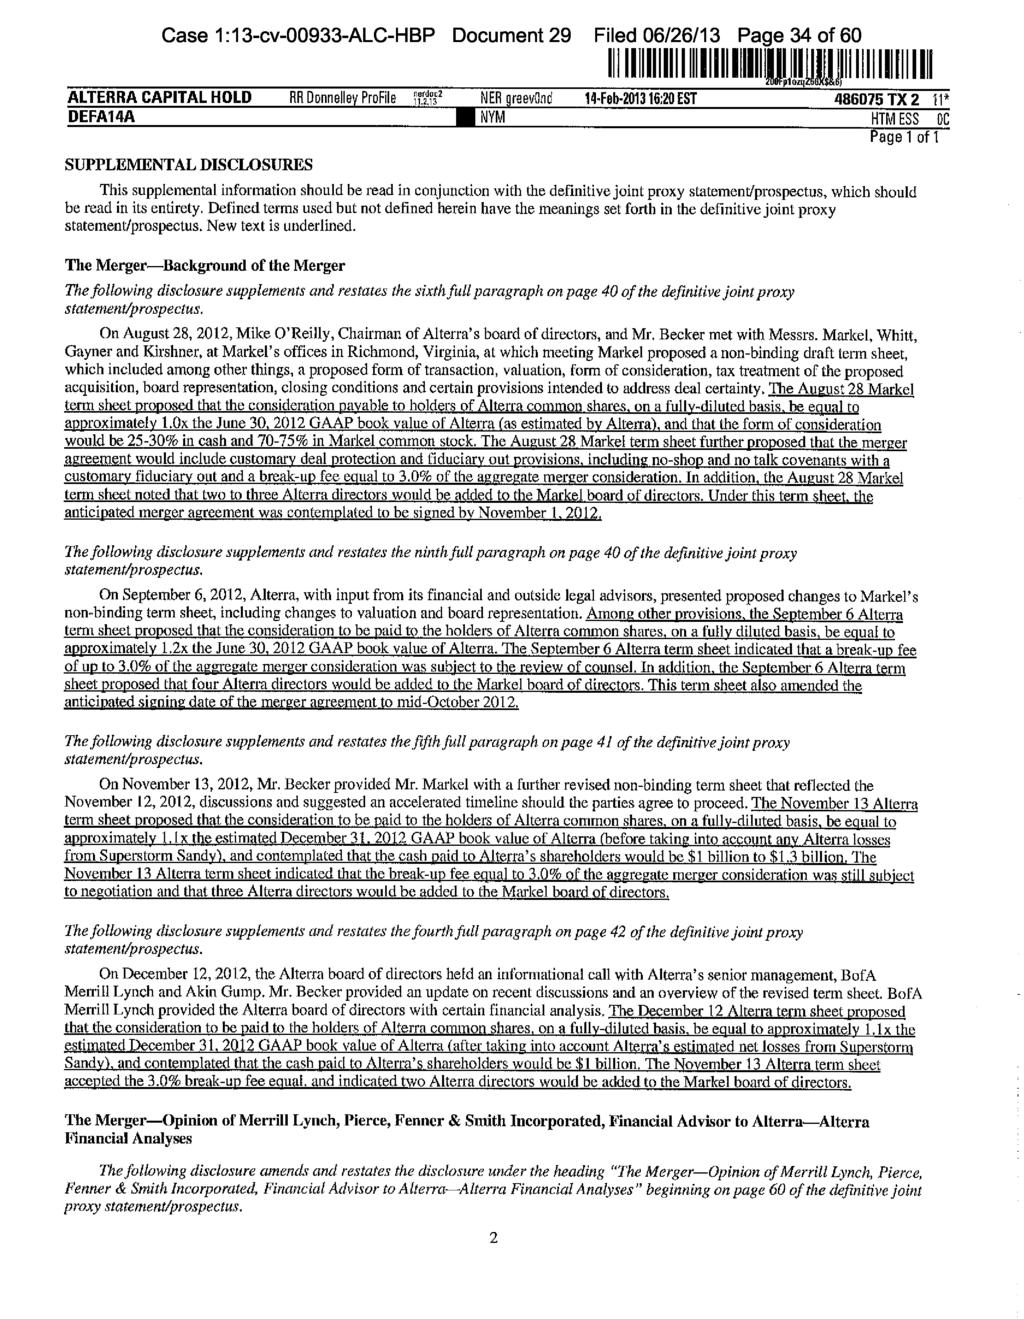 Case 1:13-cv-00933-ALC-HBP Document 29 Filed 06/26/13 Page 34 of 60 11111111111 liii IIIIi I 111111 SUPPLEMENTAL DISCLOSURES NER greevind 14Feb-2013 1620 EST 486075 TX 2 11* NYM RIM ESS DC Page 1 of